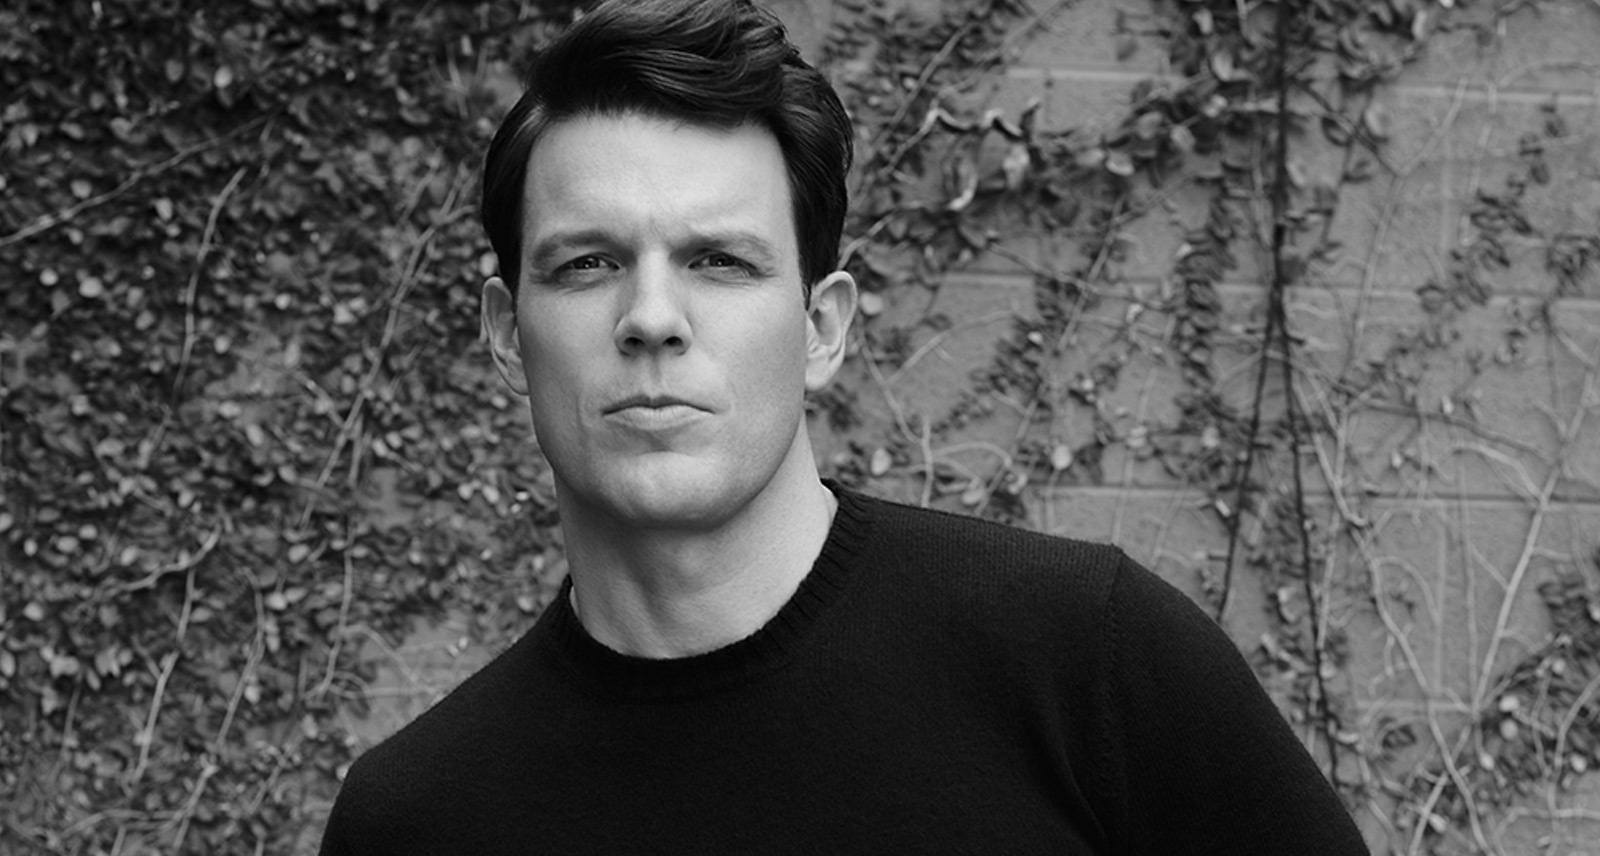 No More Mr. Nice Guy: A Q&A with Jake Lacy, Star of HBO’s ‘The White Lotus’